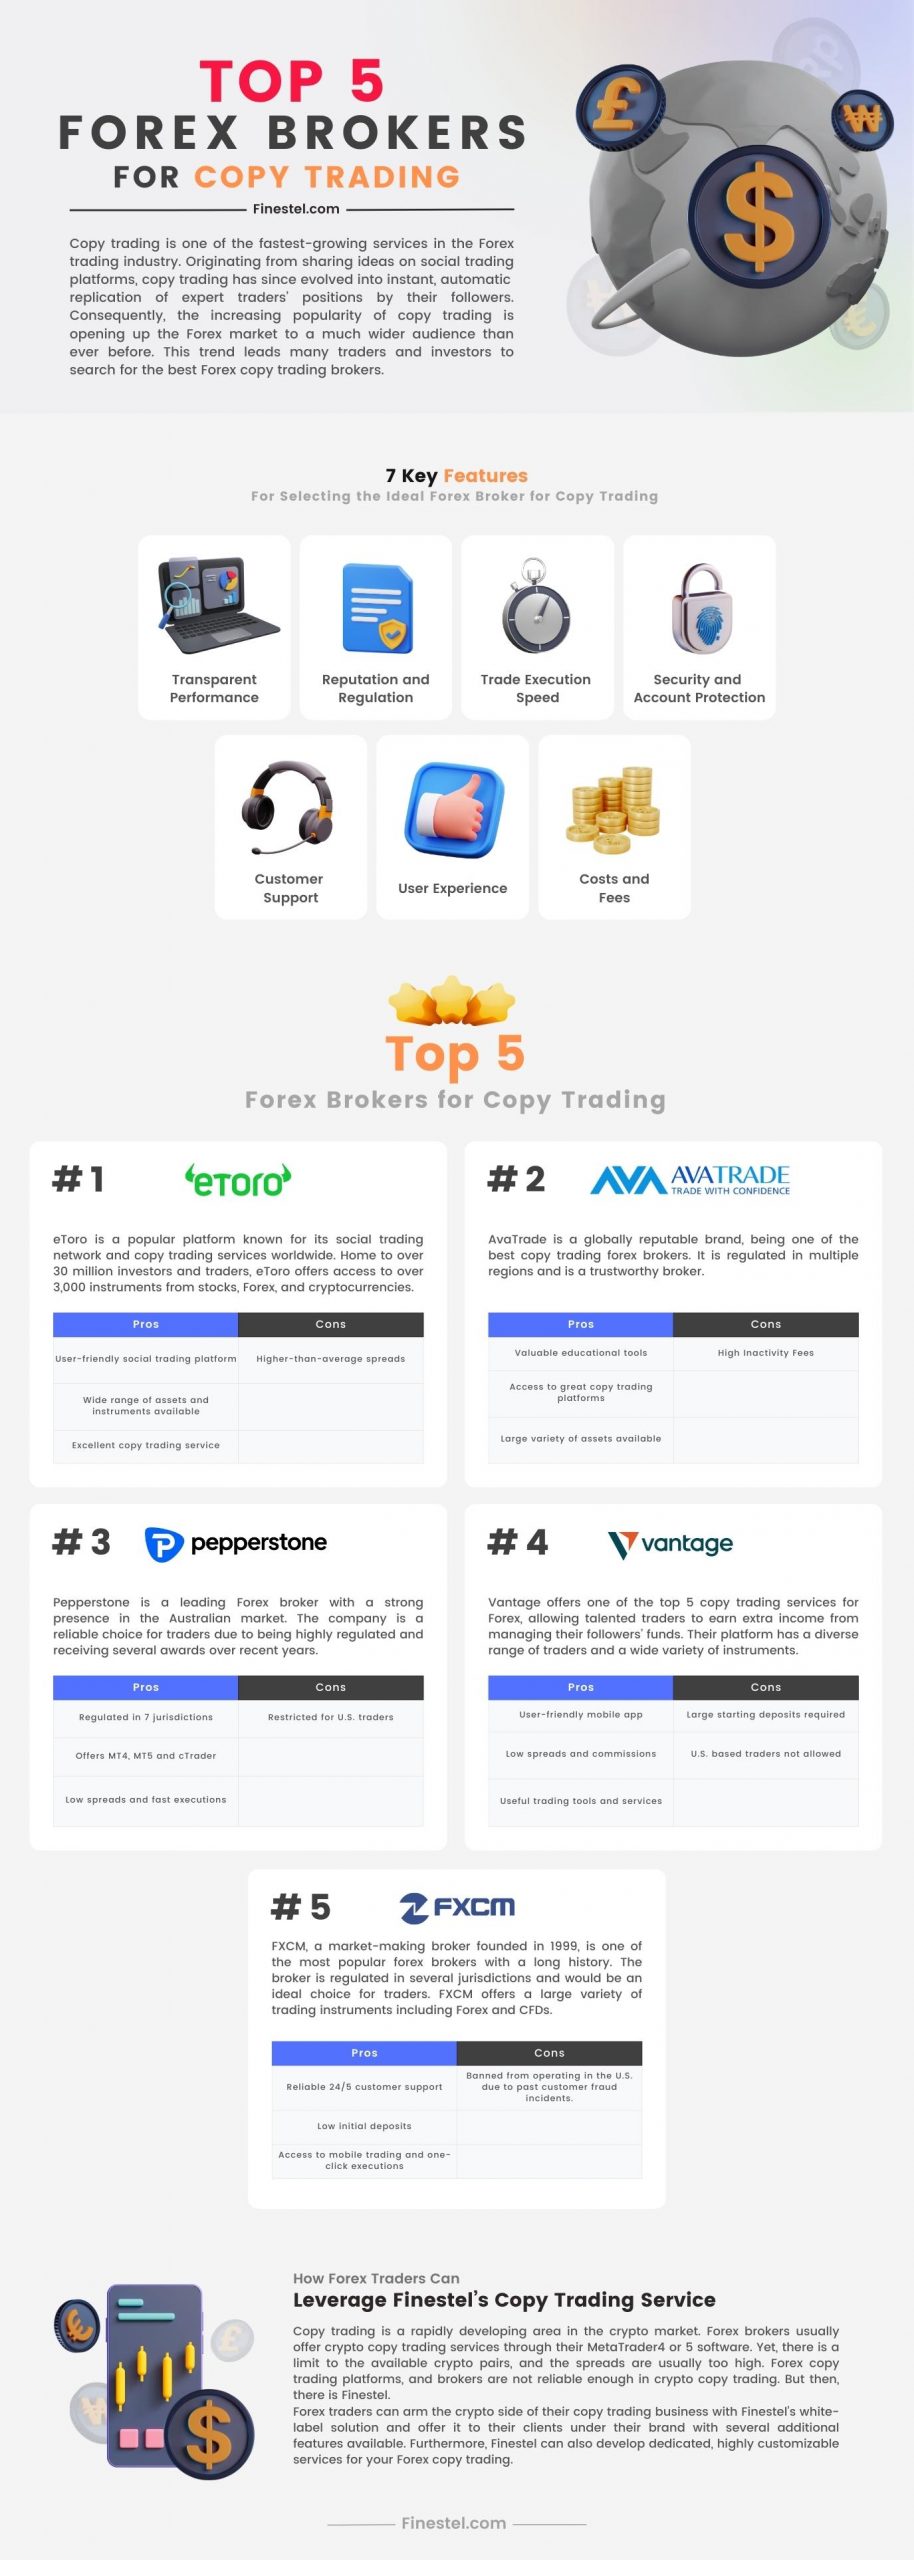 Top 5 Forex Brokers for Copy Trading Infographic